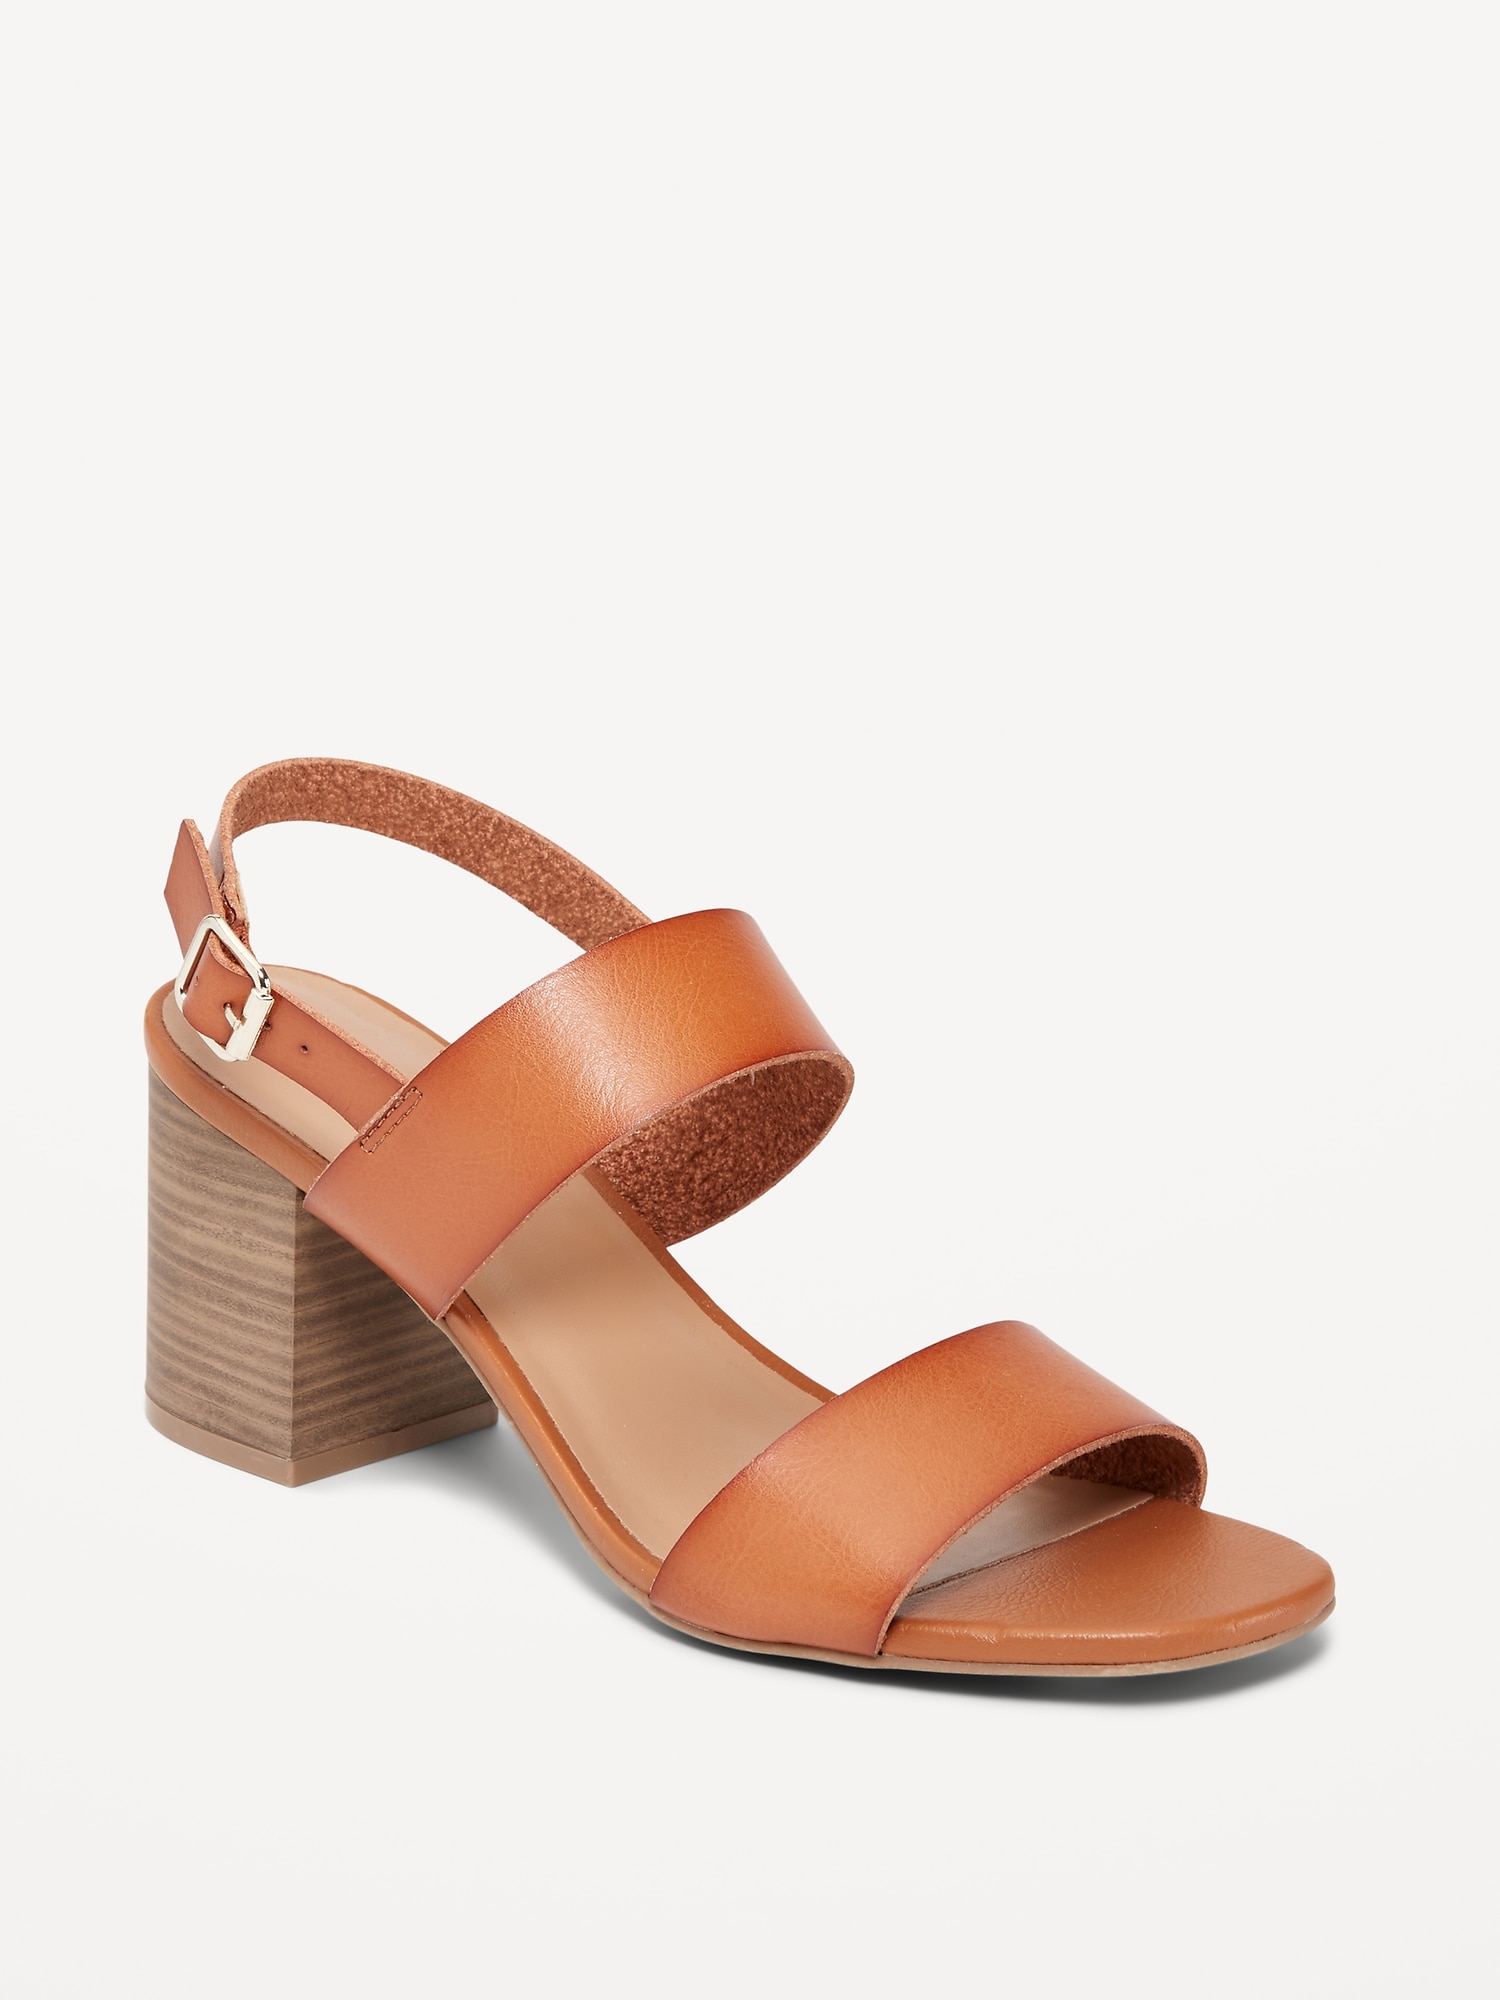 Faux-Leather Strappy Block-Heel Sandals